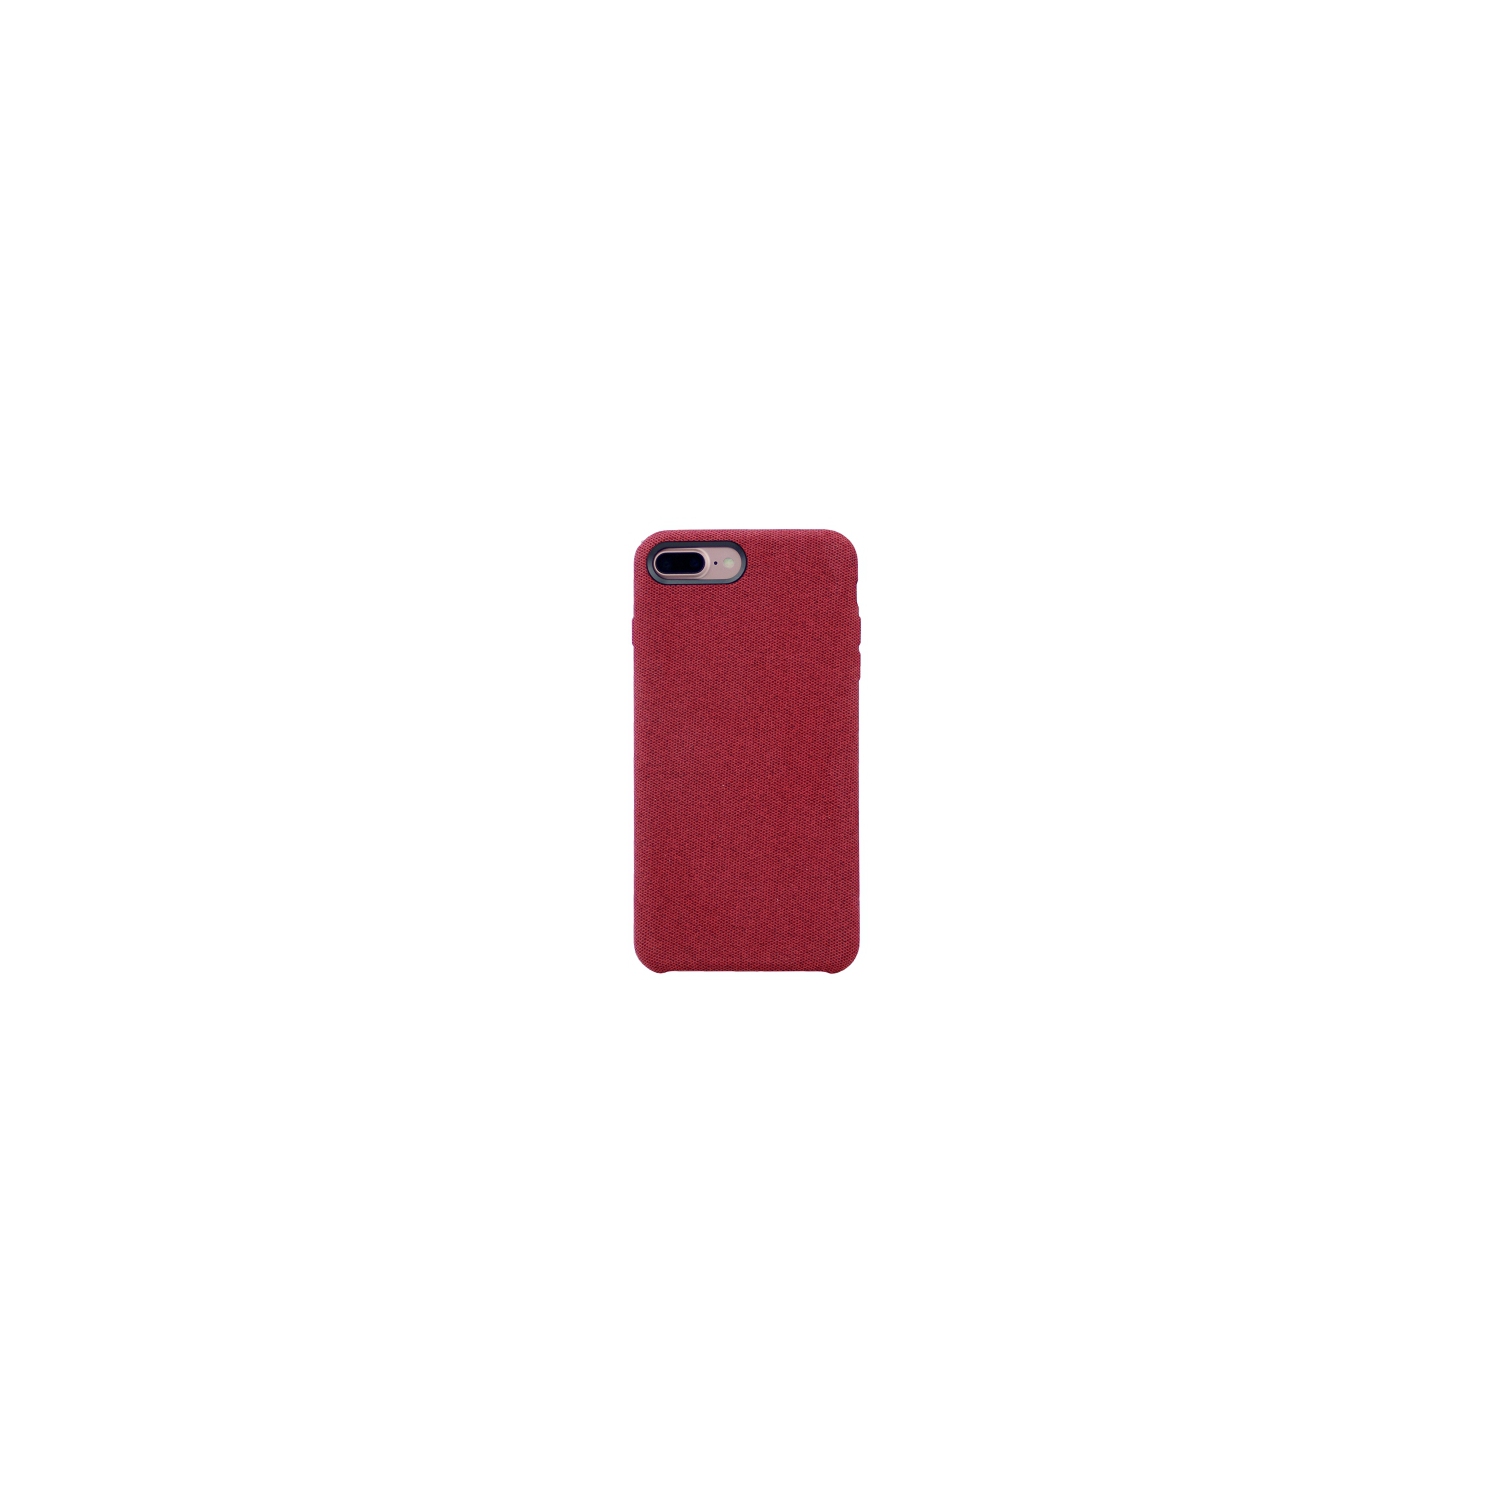 Iphone 7/8 Plus Fabric Protective Case, Red